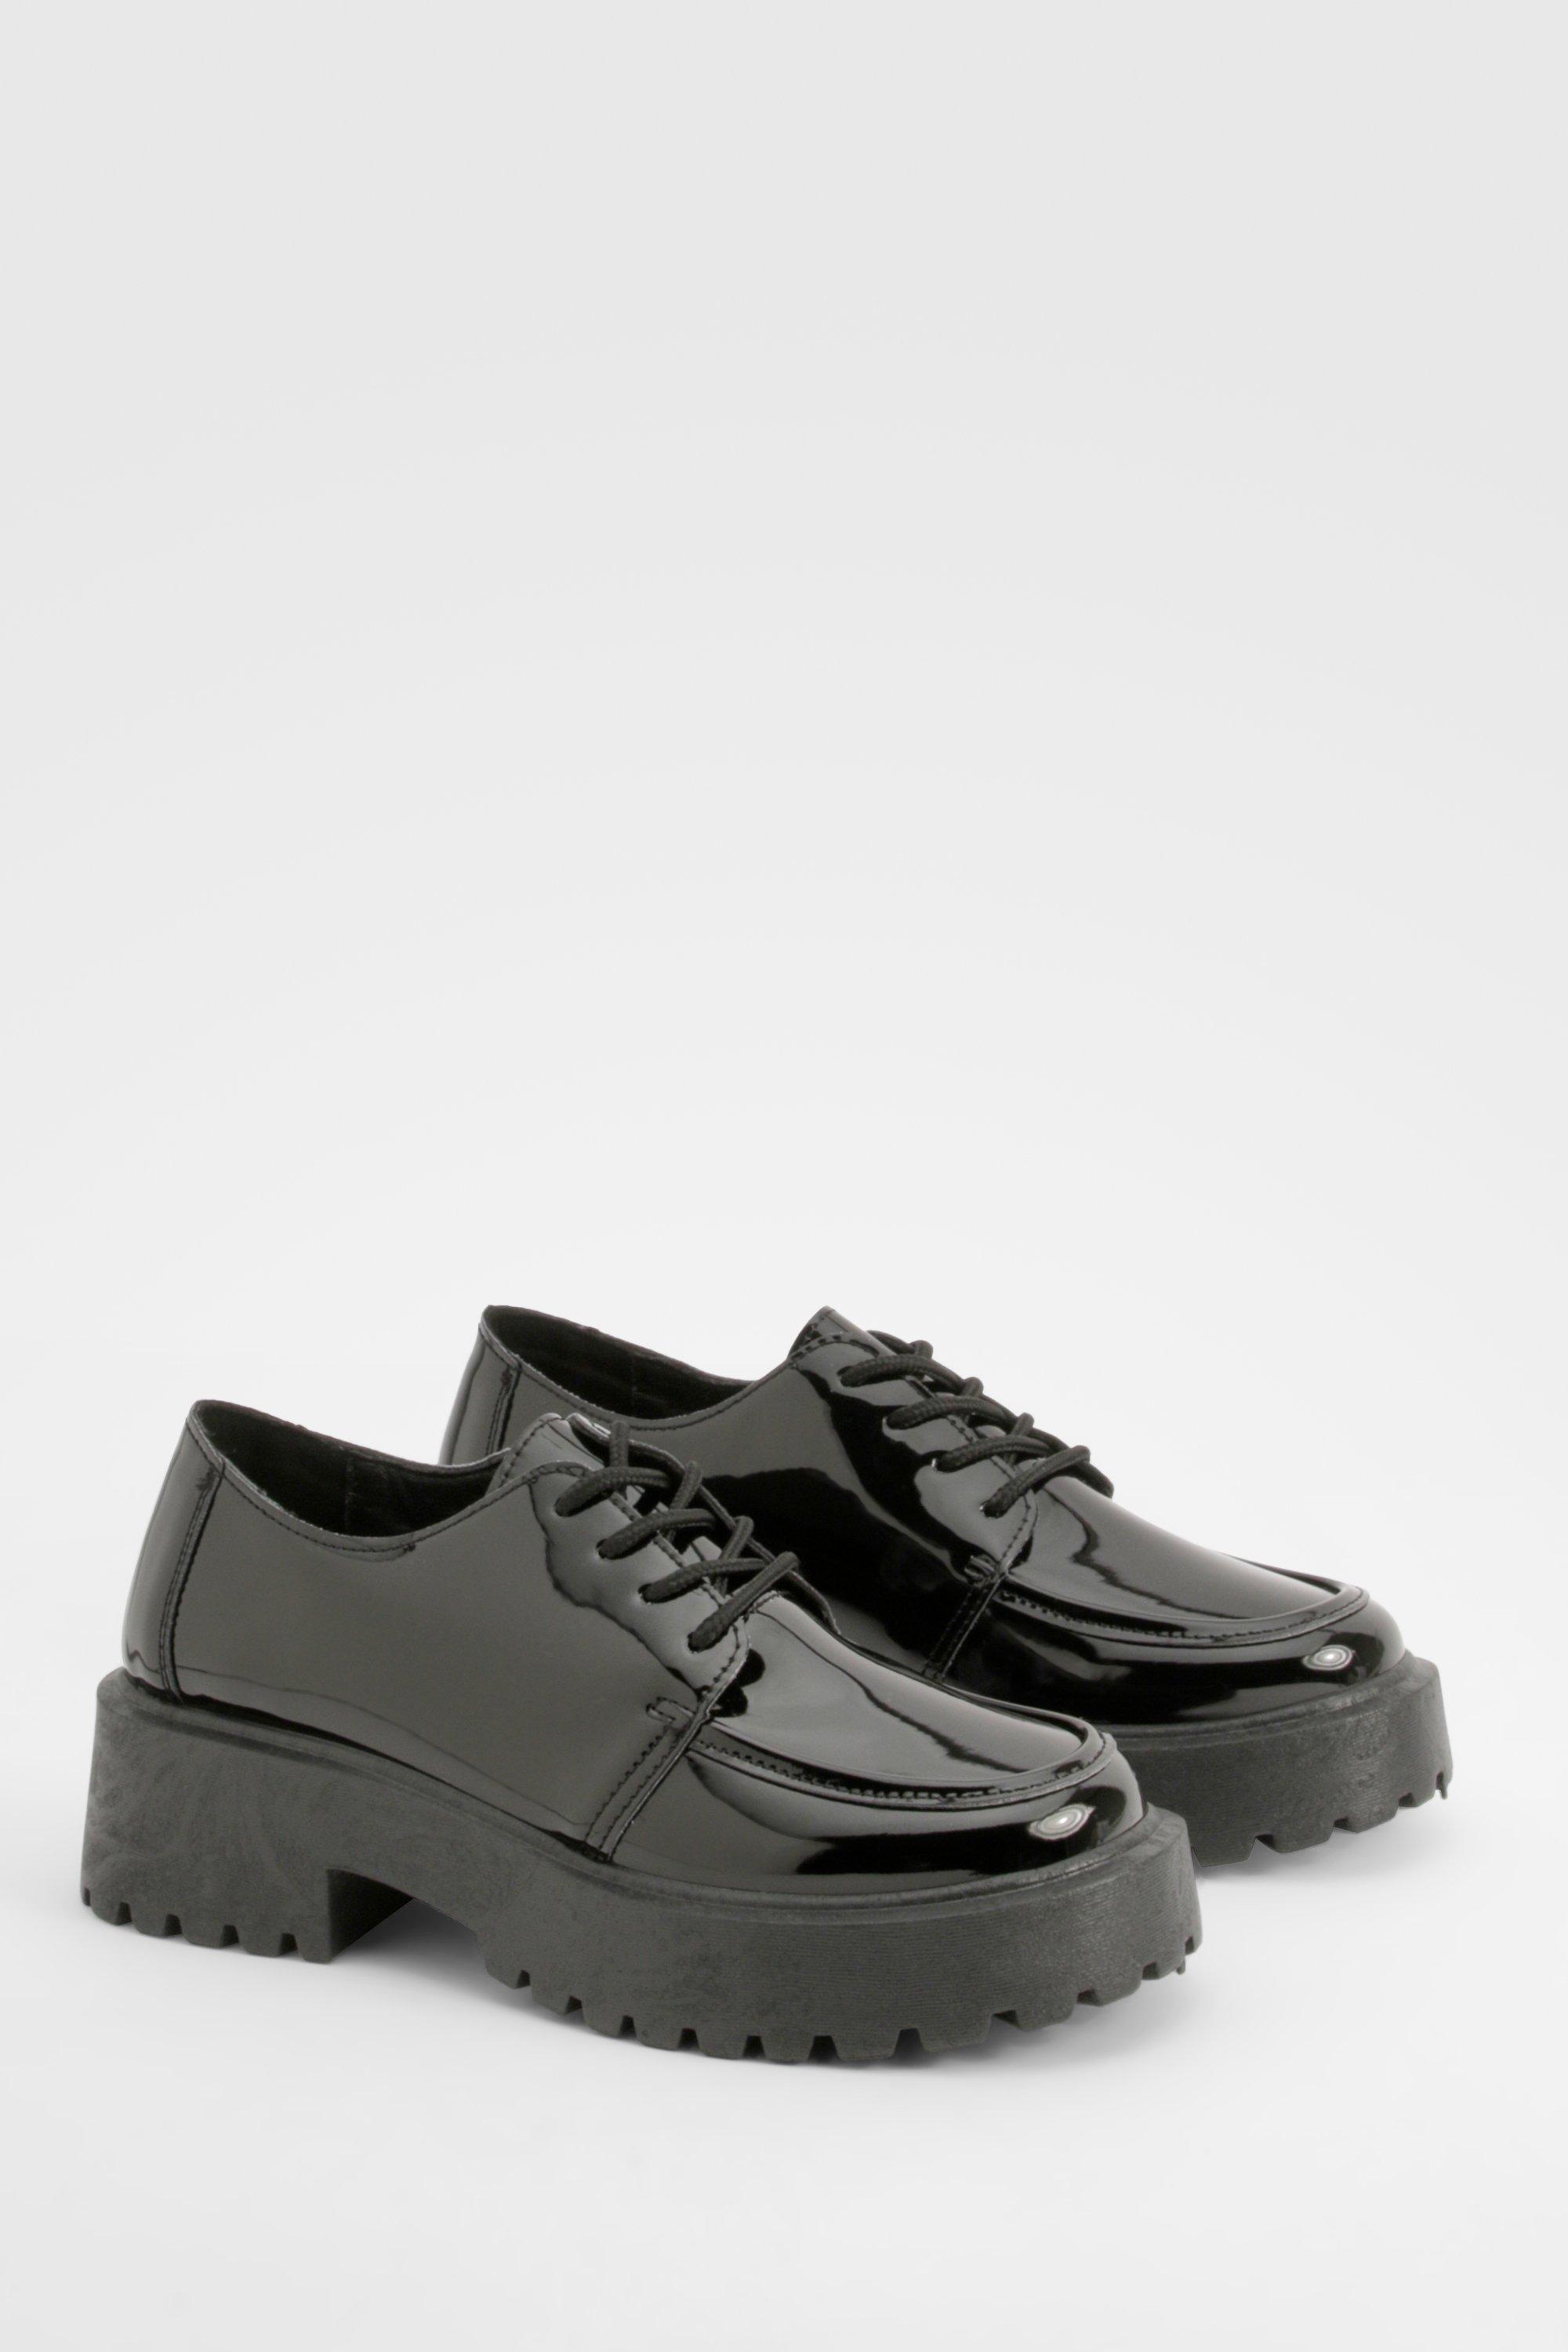 Boohoo Patent Lace Up Chunky Sole Shoes, Black